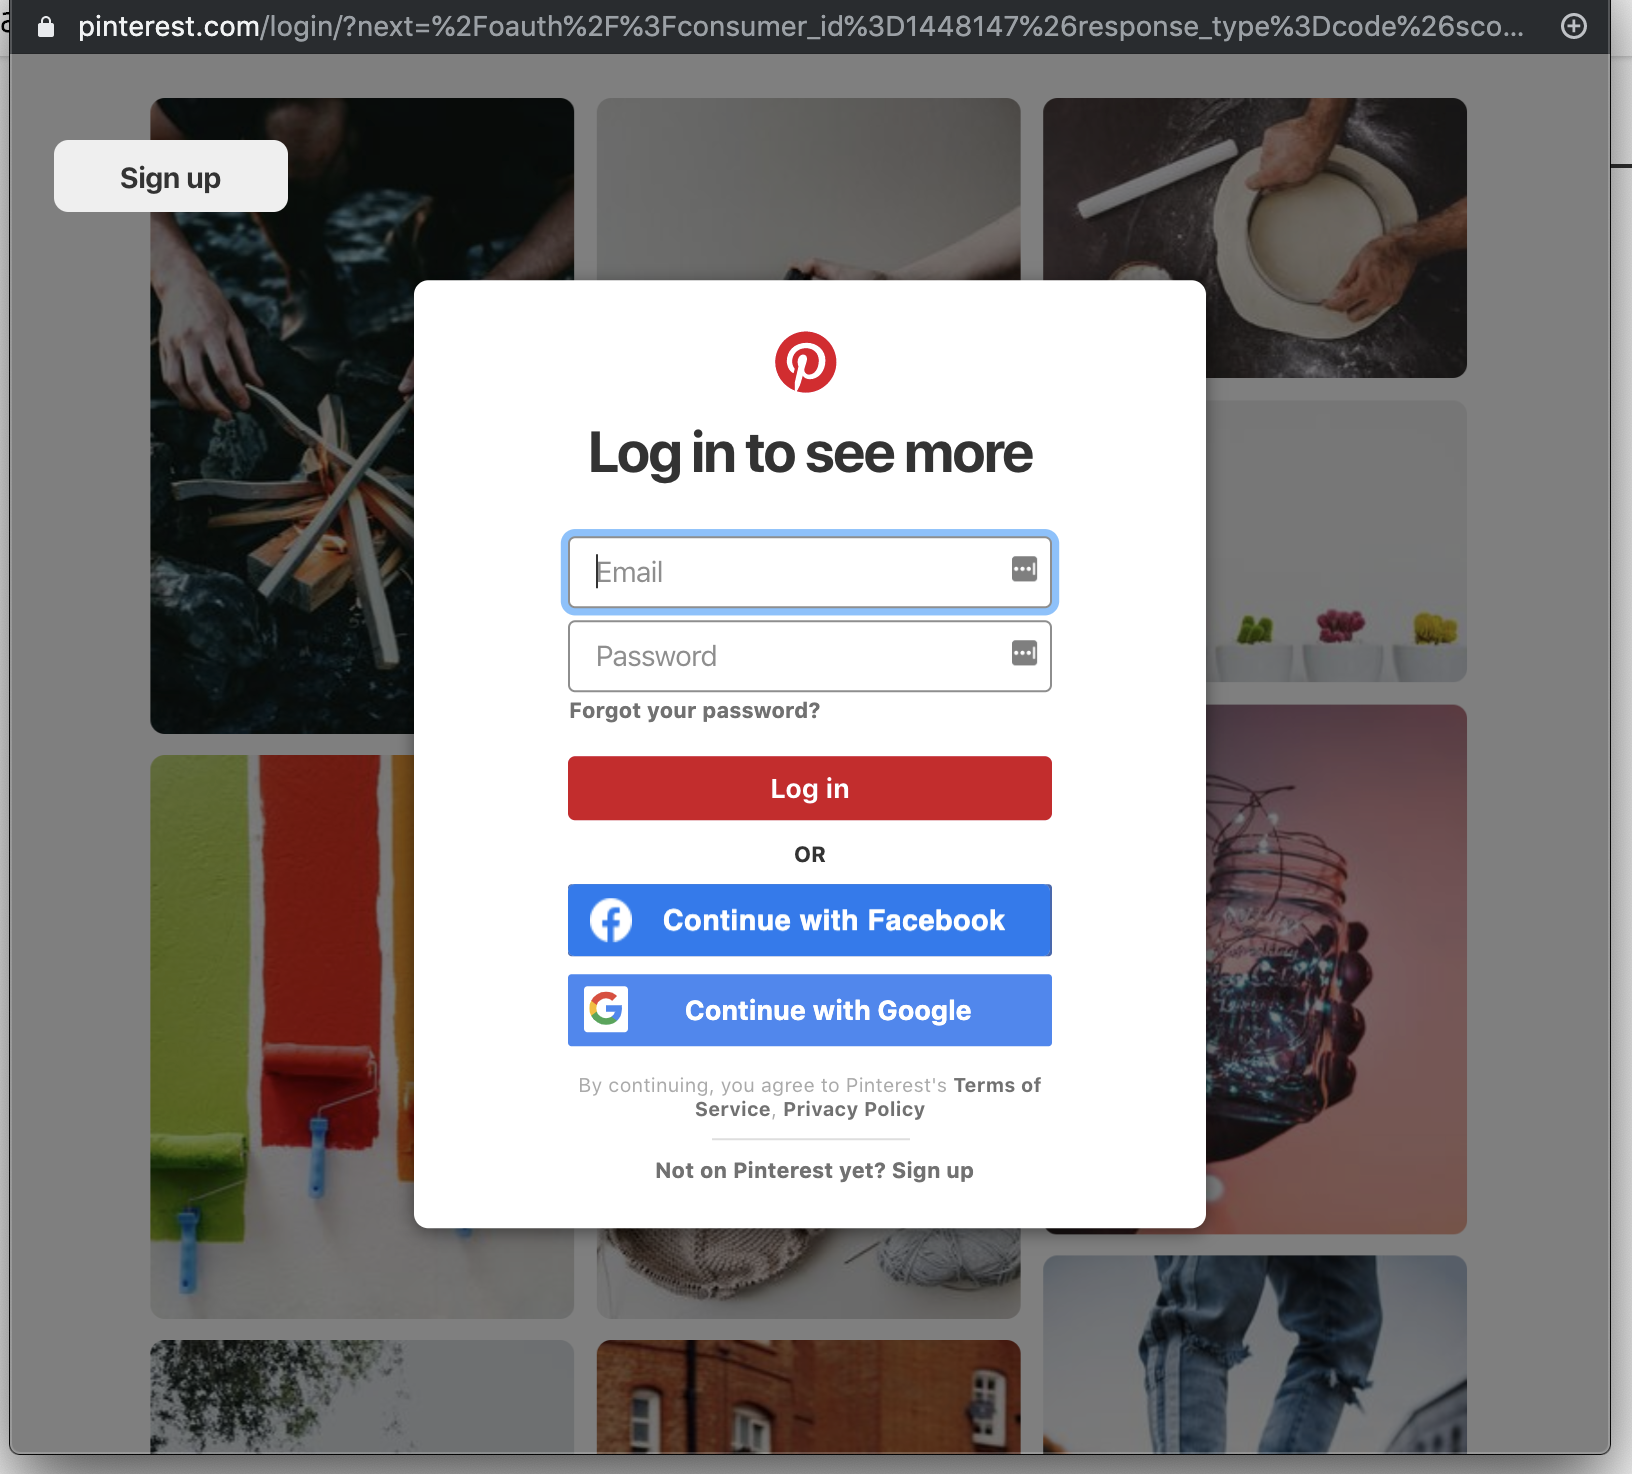 C-Authorize_DA_with_OAuth-Pinterest_login-screen.png